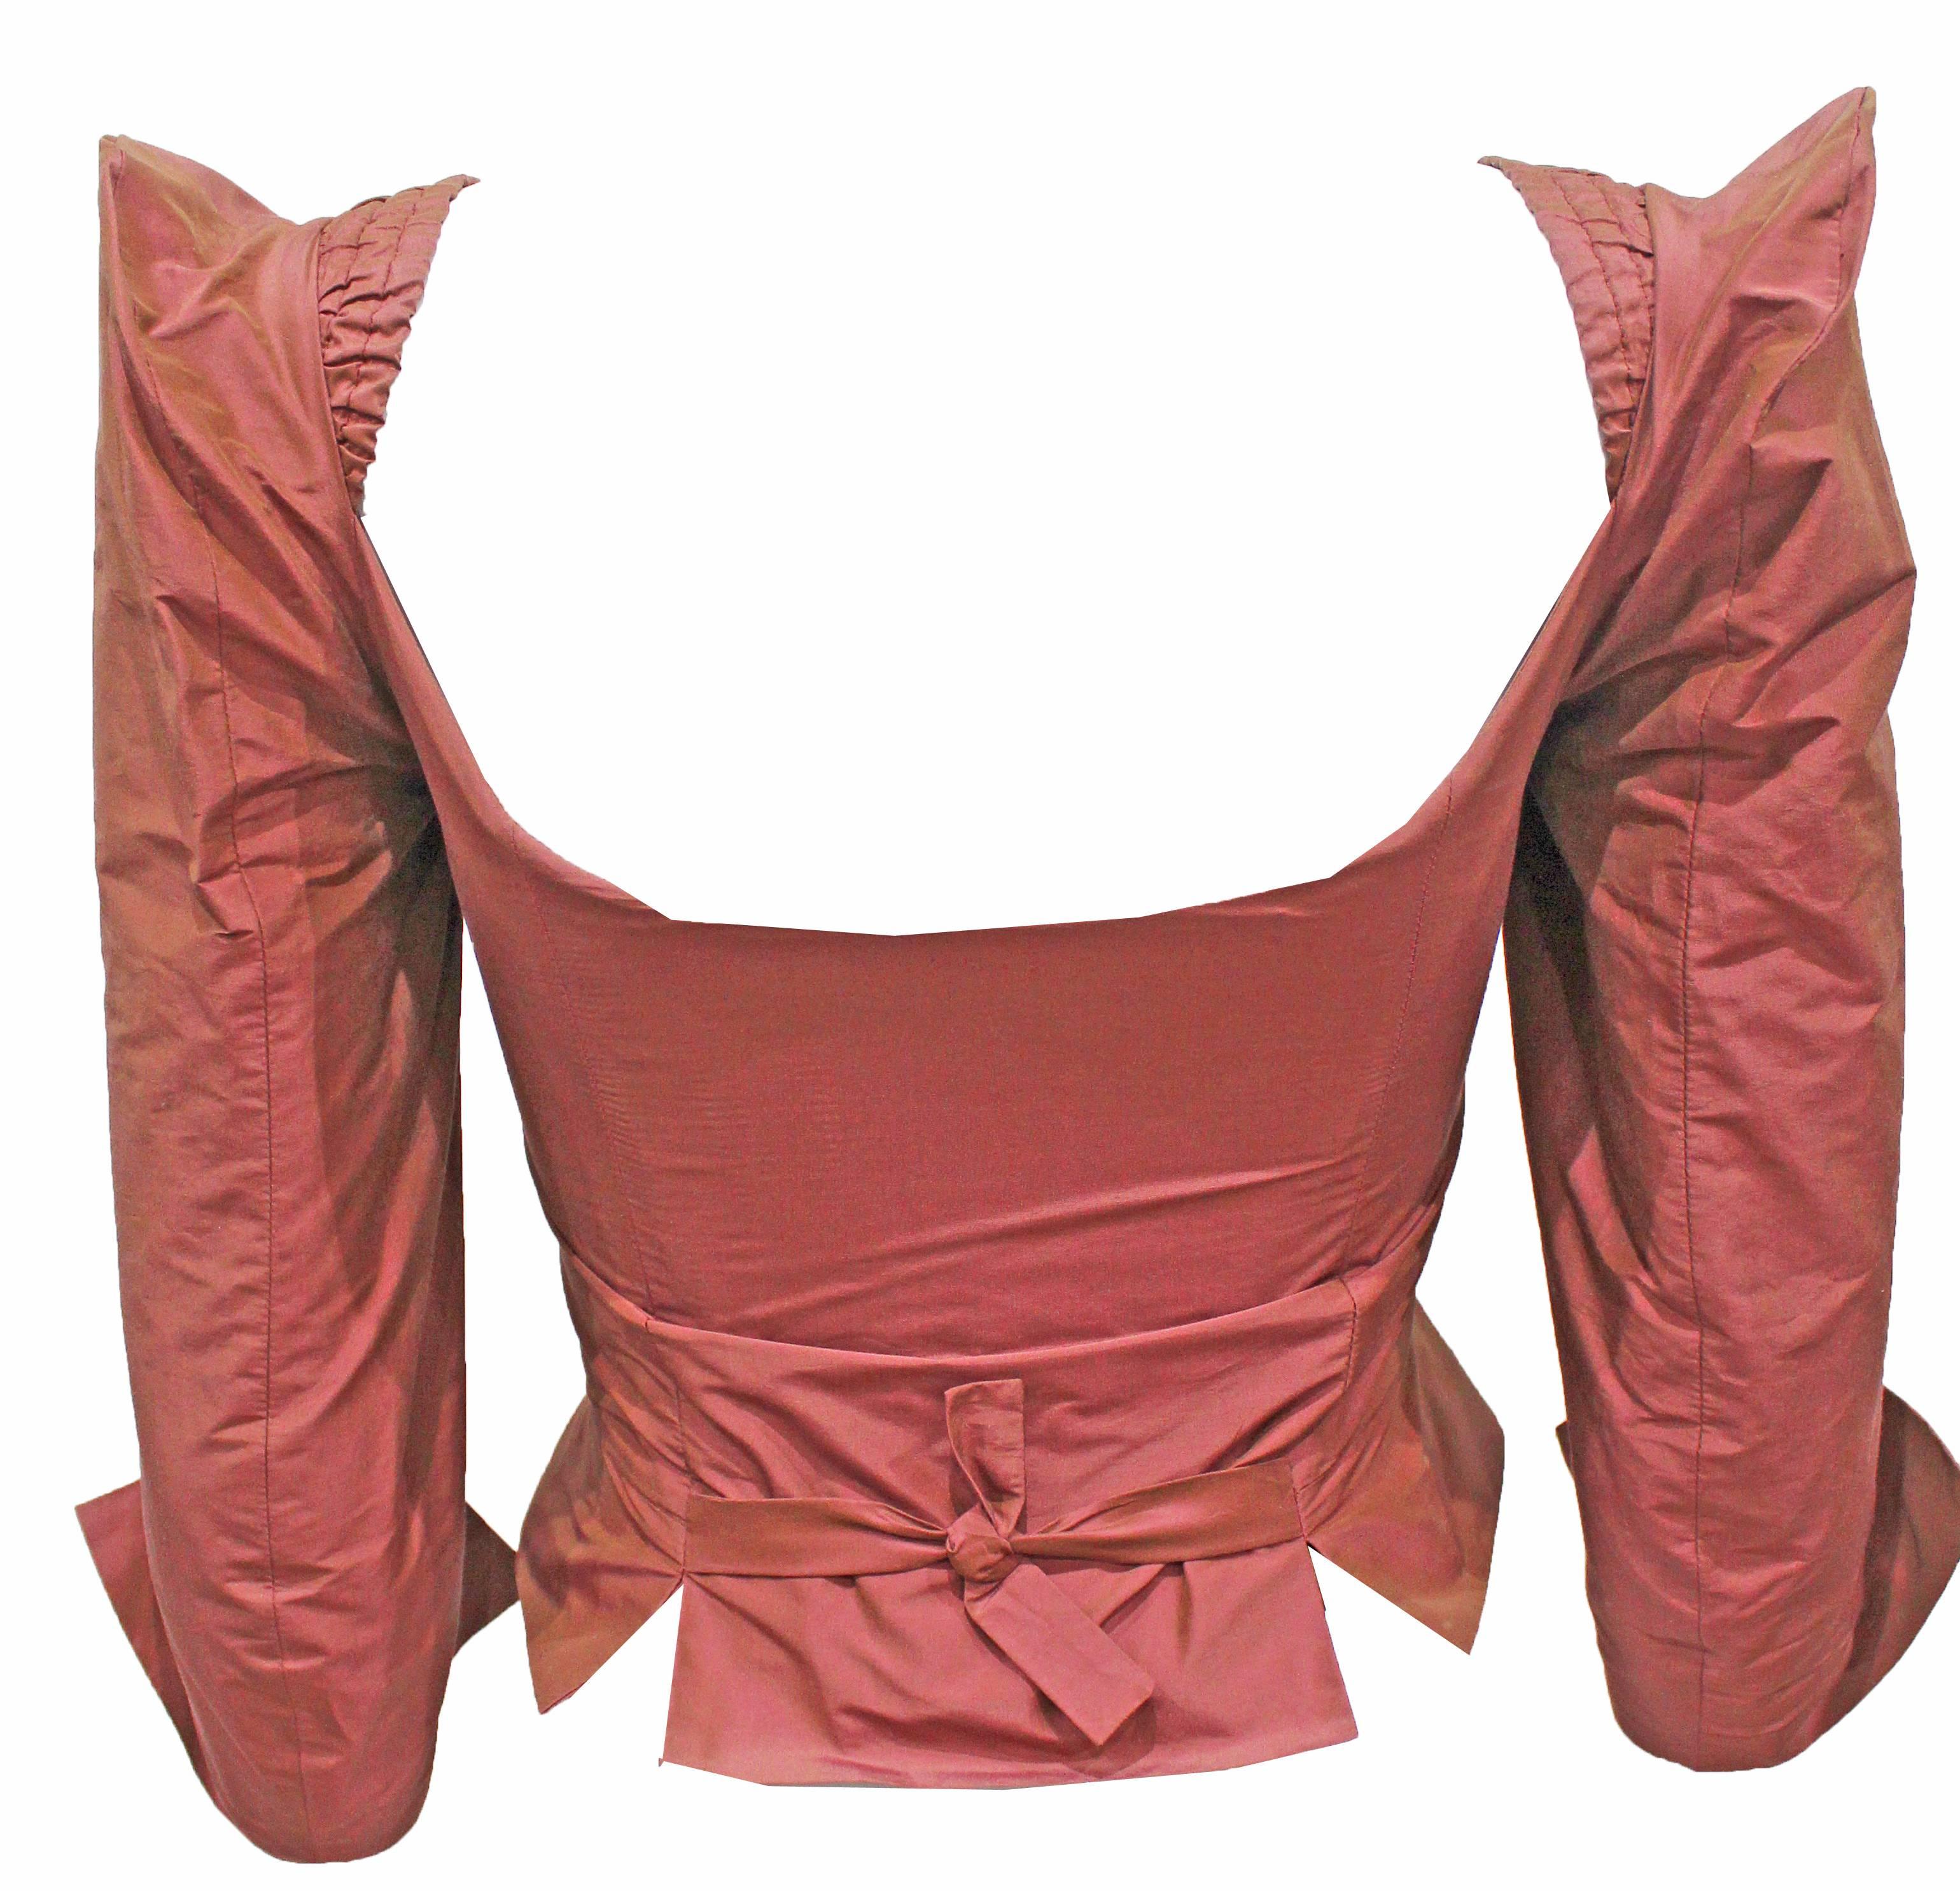 A rare rose pink Vivienne Westwood silk taffeta corset from the 1990s.

The corset is labelled a size UK 10, however the sizing runs very small and would be considered a UK 6-8 / US 2-4 / XS - Small